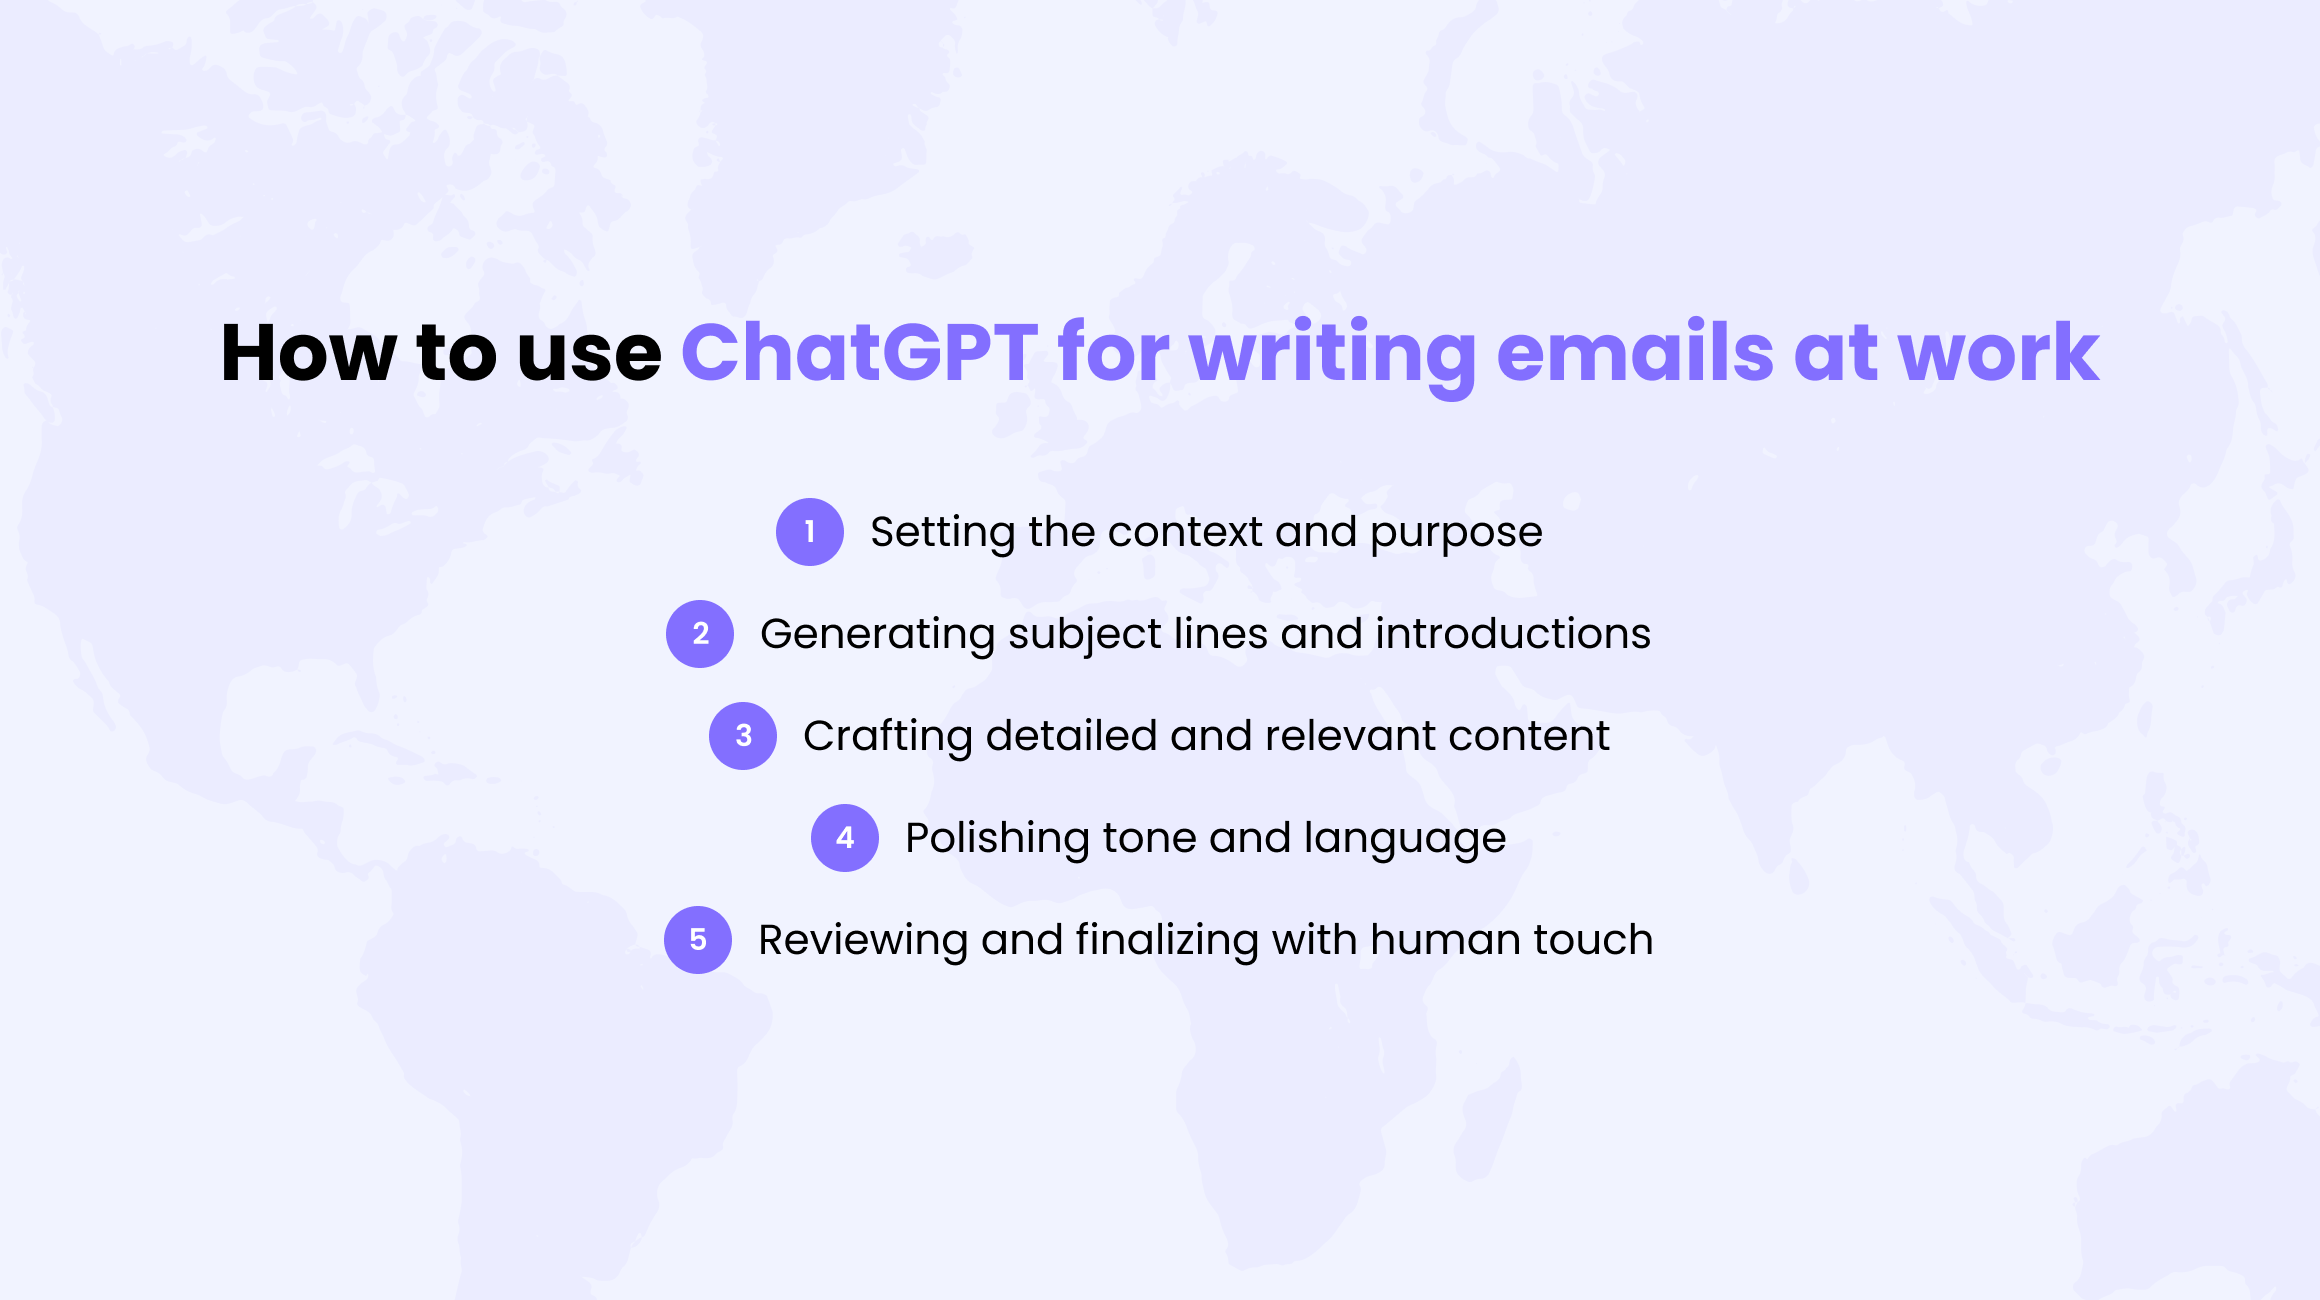 How to Use ChatGPT for Writing Emails